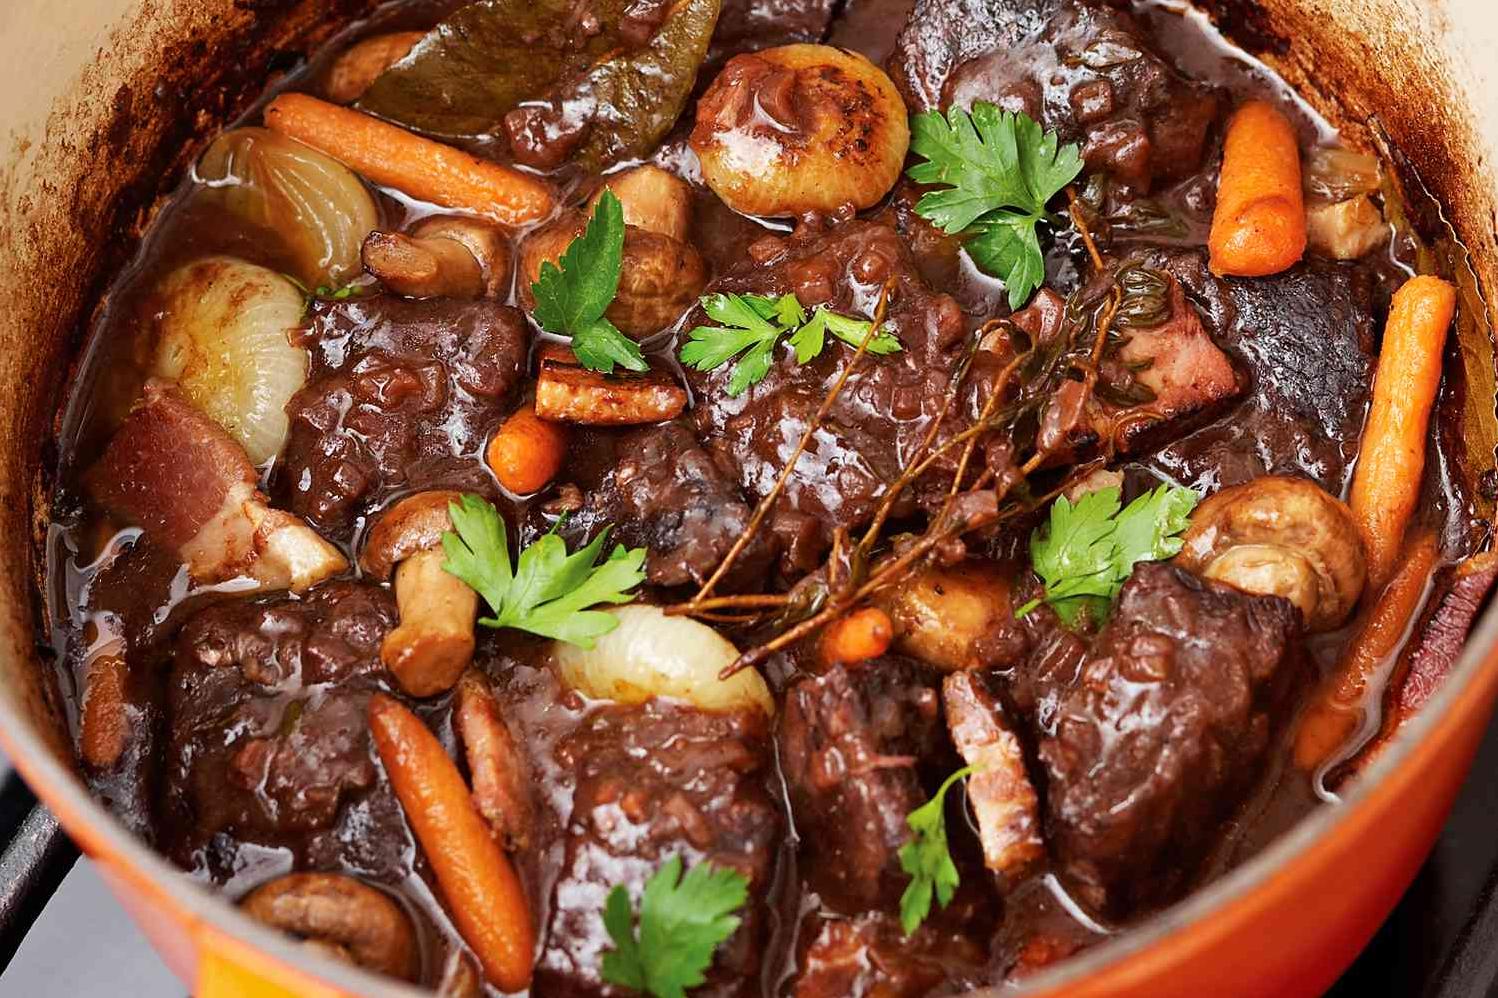  Don't be scared to use a big pot - this recipe makes plenty to share!